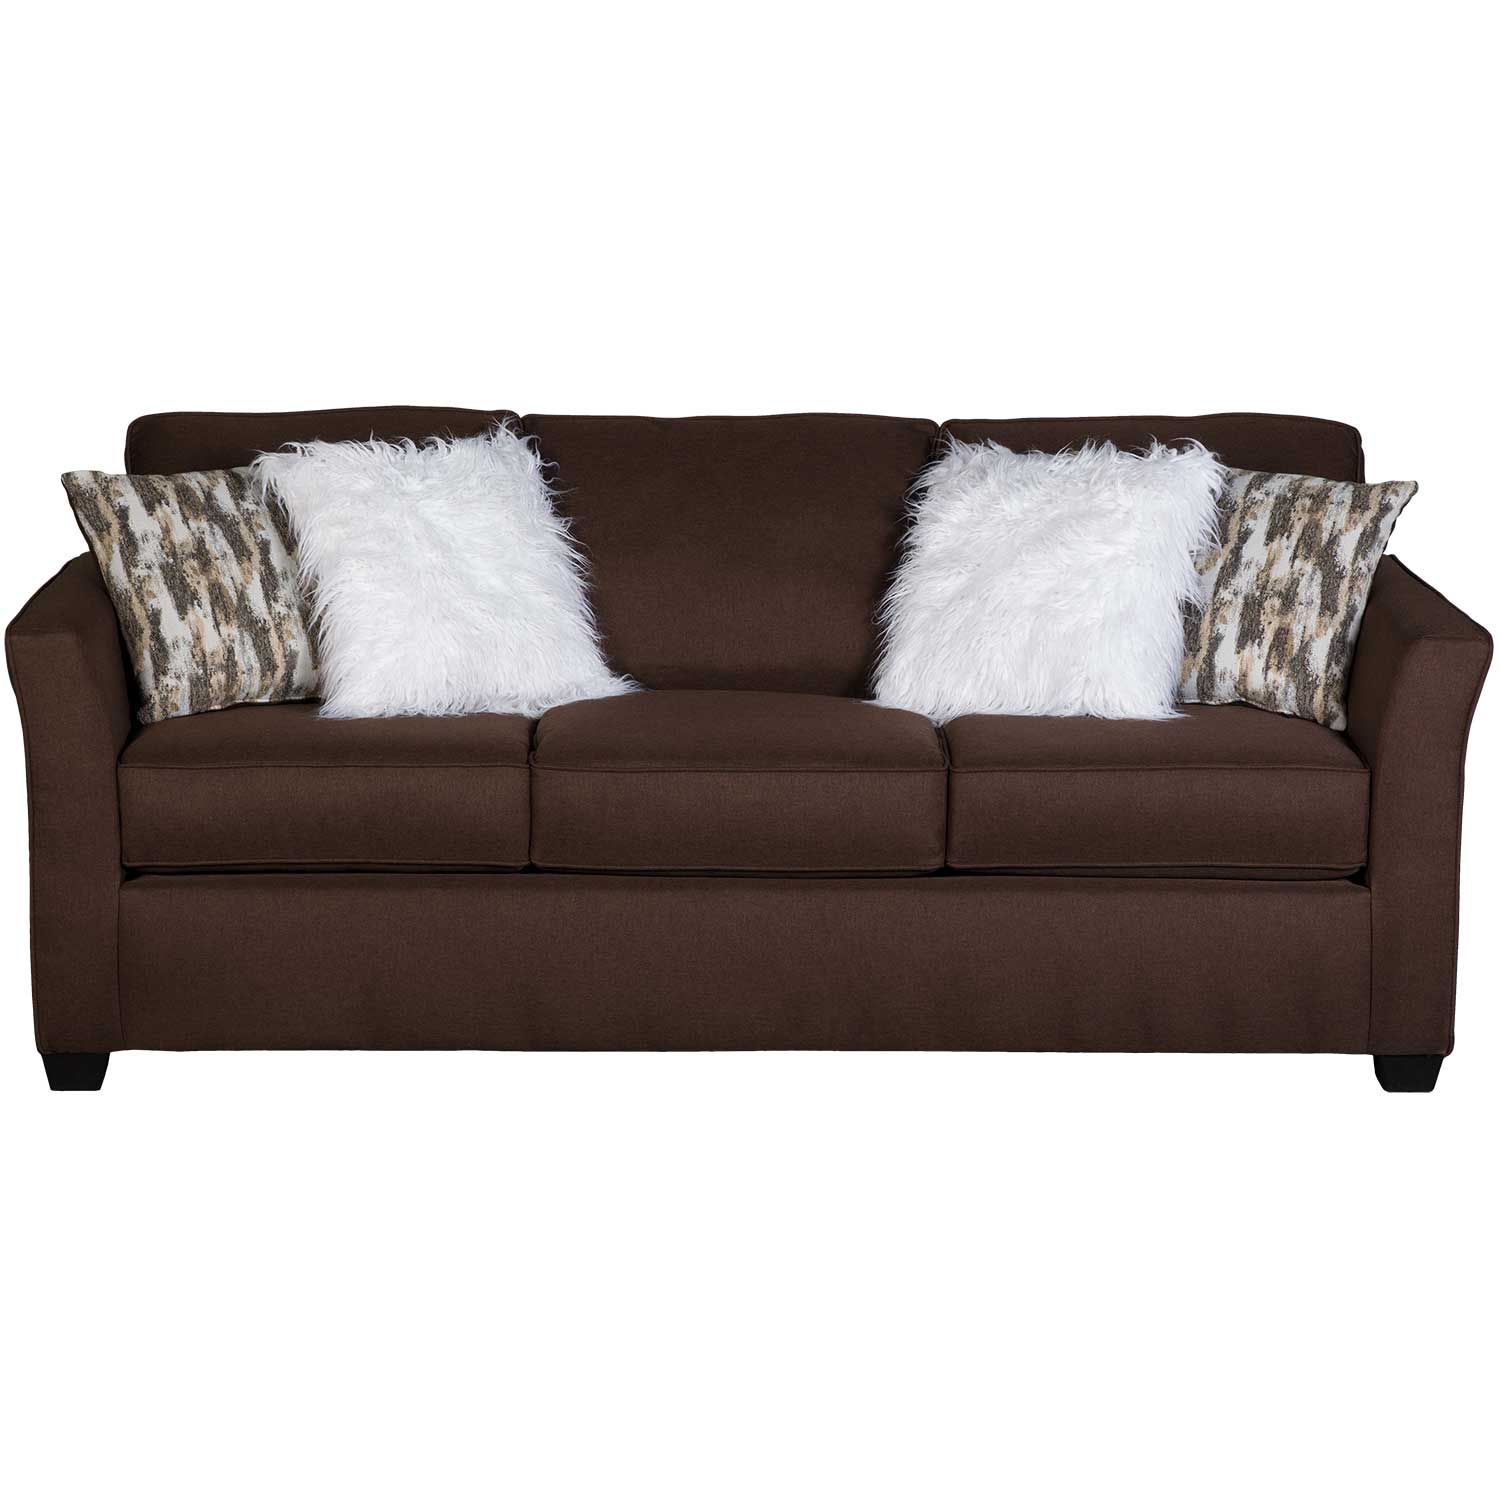 Keegan Chocolate Brown Sofa | Z 1003 | Afw With Sofas In Chocolate Brown (Photo 4 of 15)